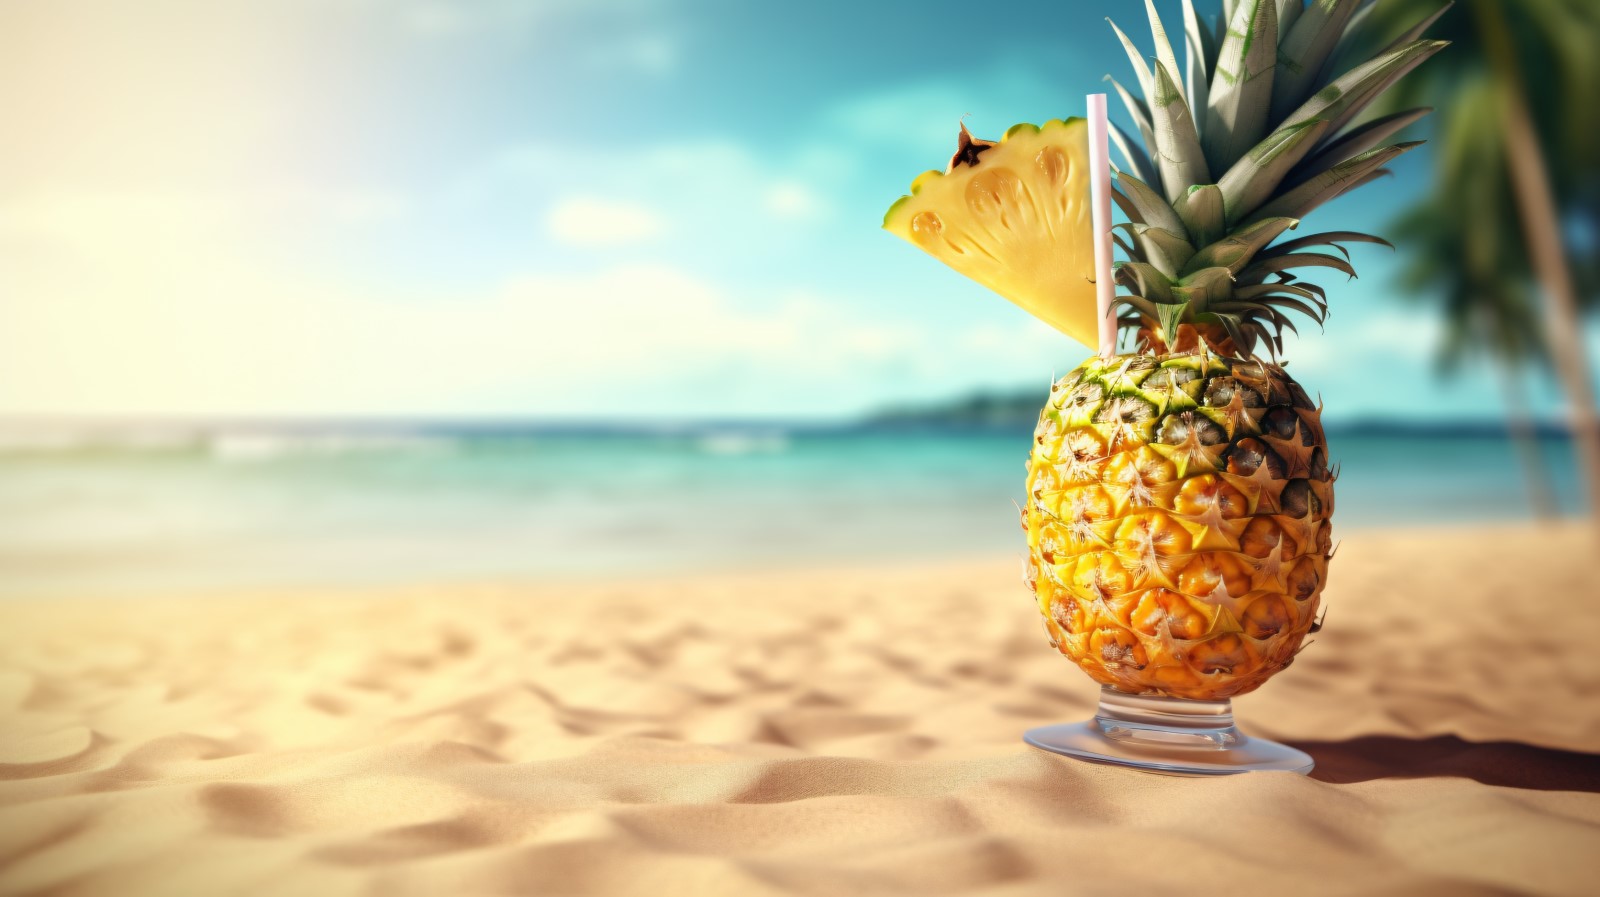 pineapple drink in cocktail glass and sand beach scene 141